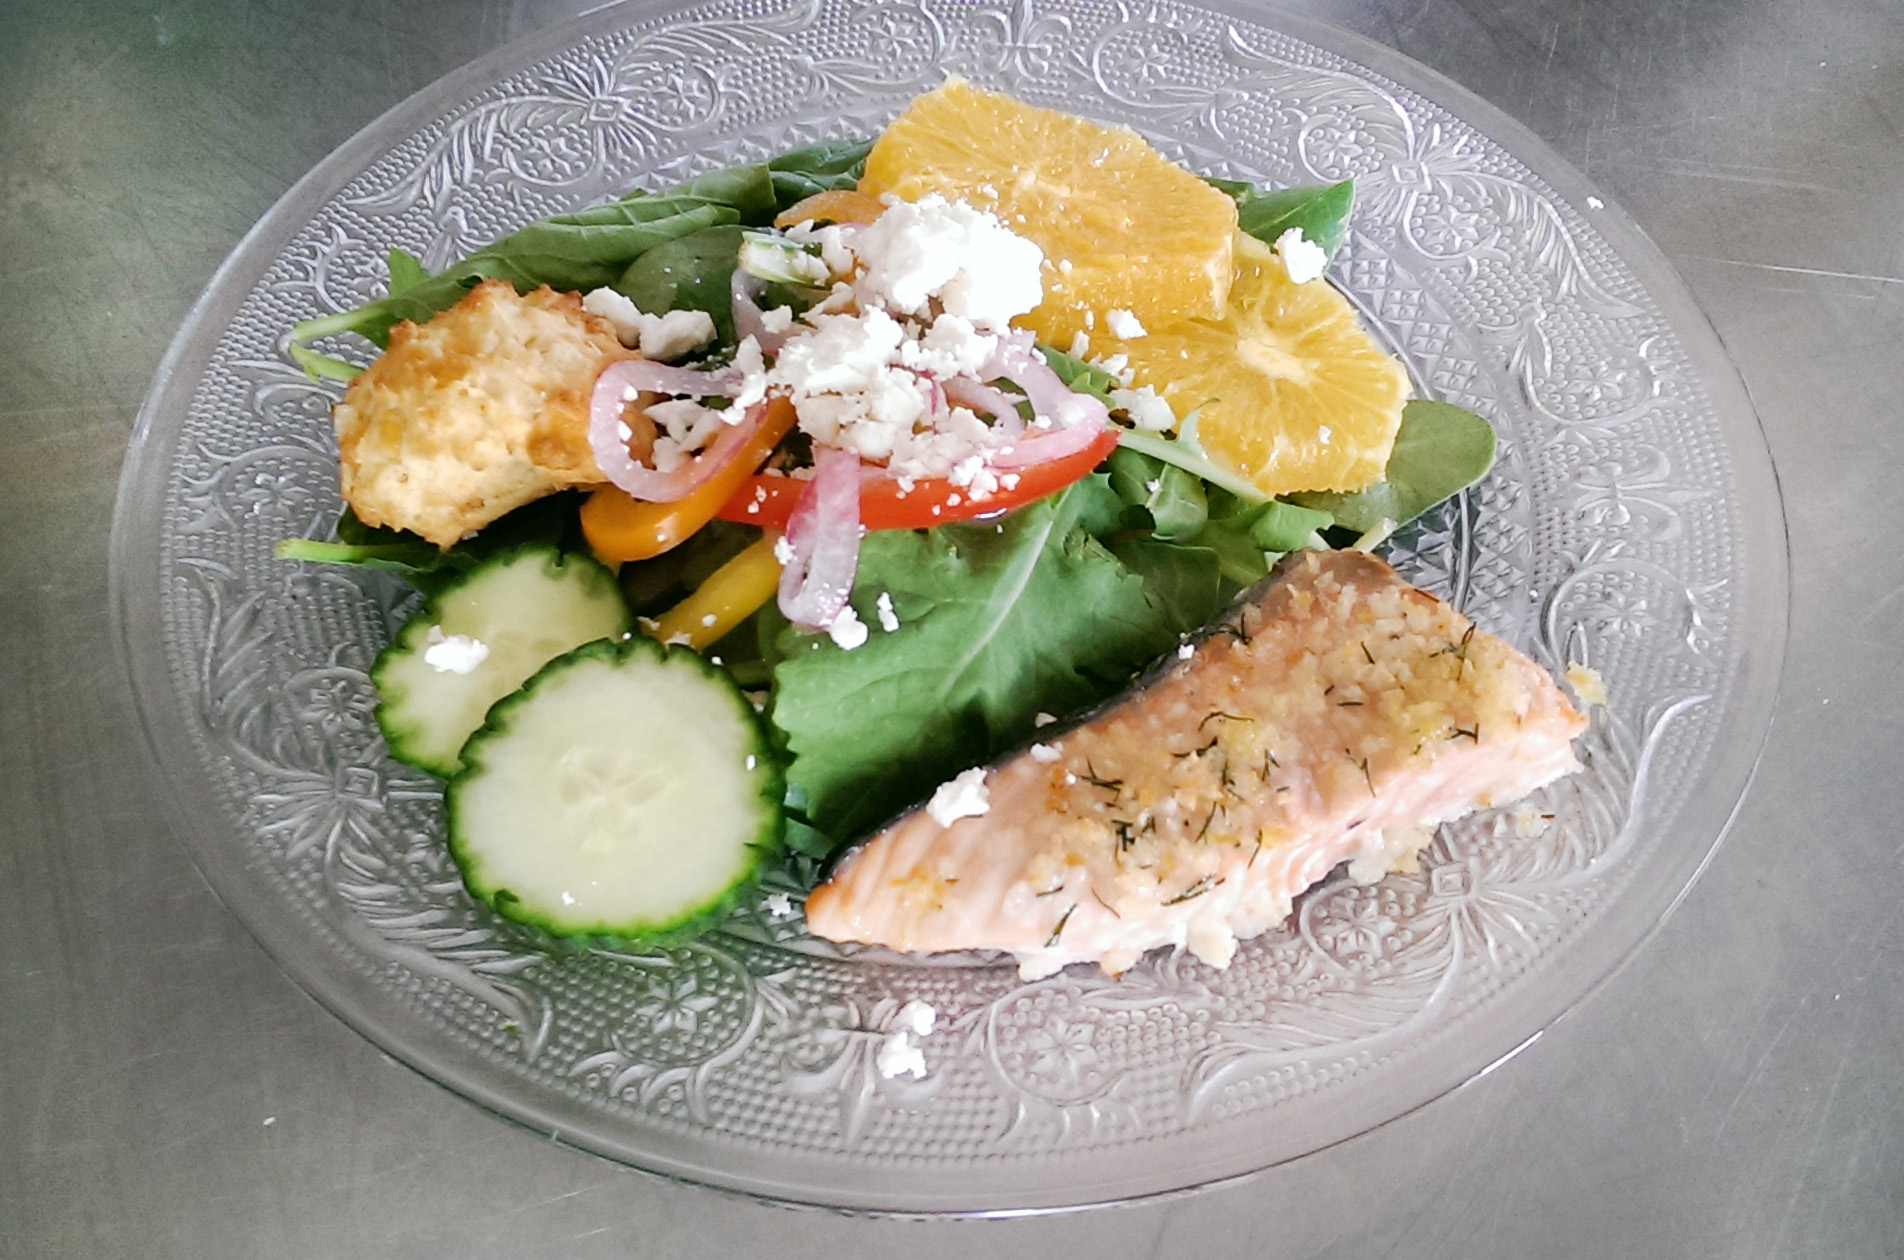  Citrus Salad with Crusted Baked Salmon and Cheddar Biscuit 